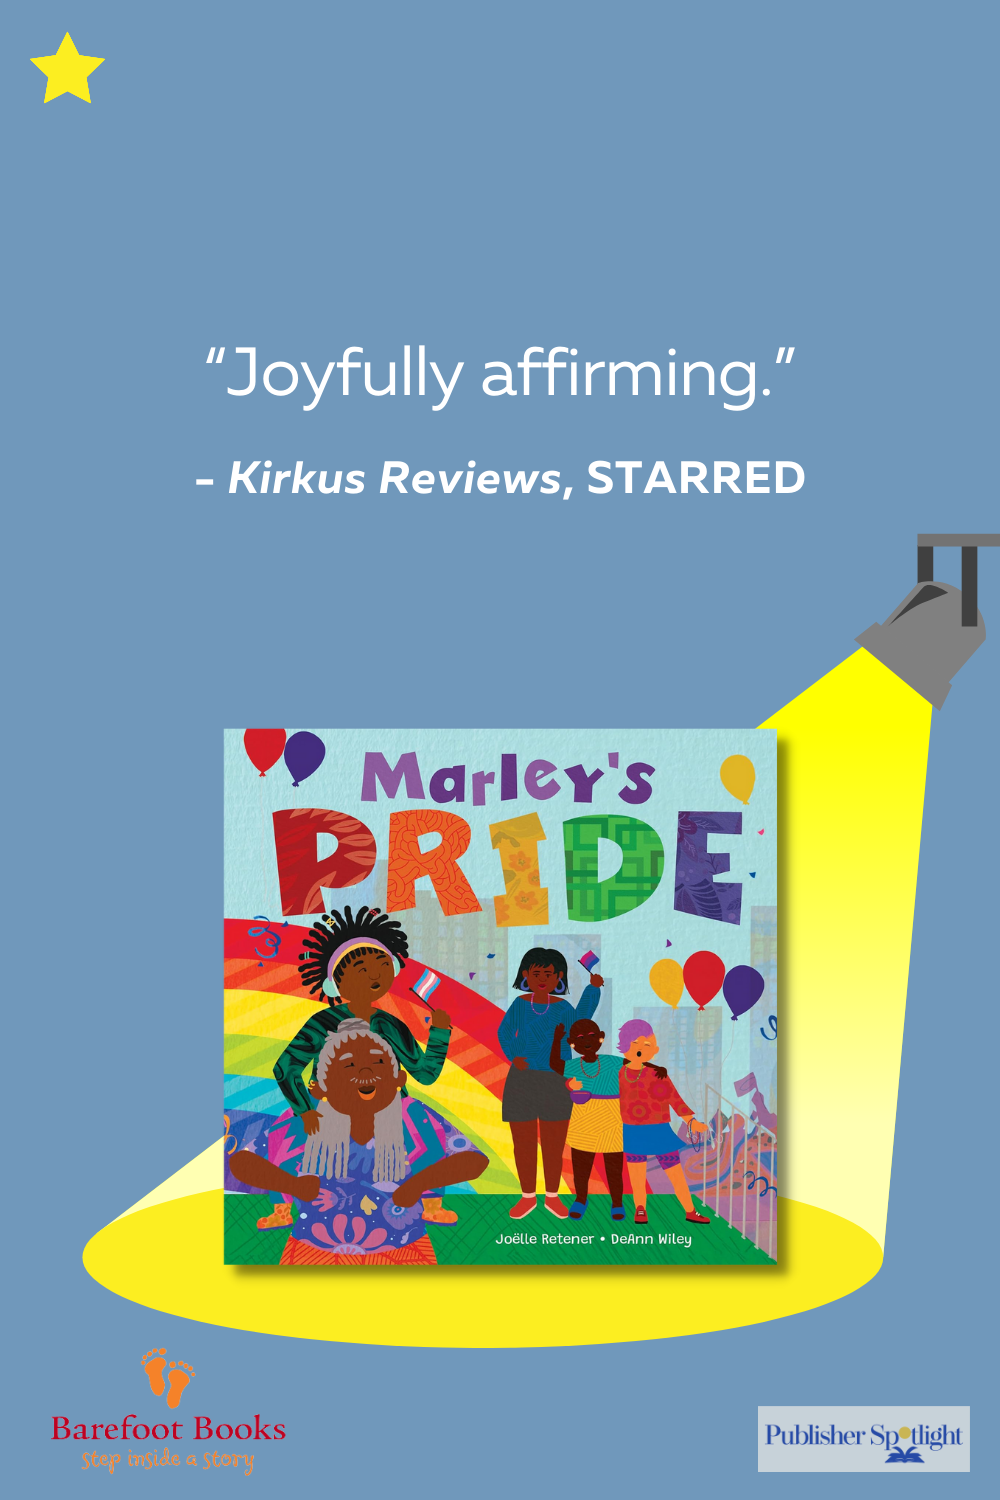 Starred review graphic for Marley's Pride